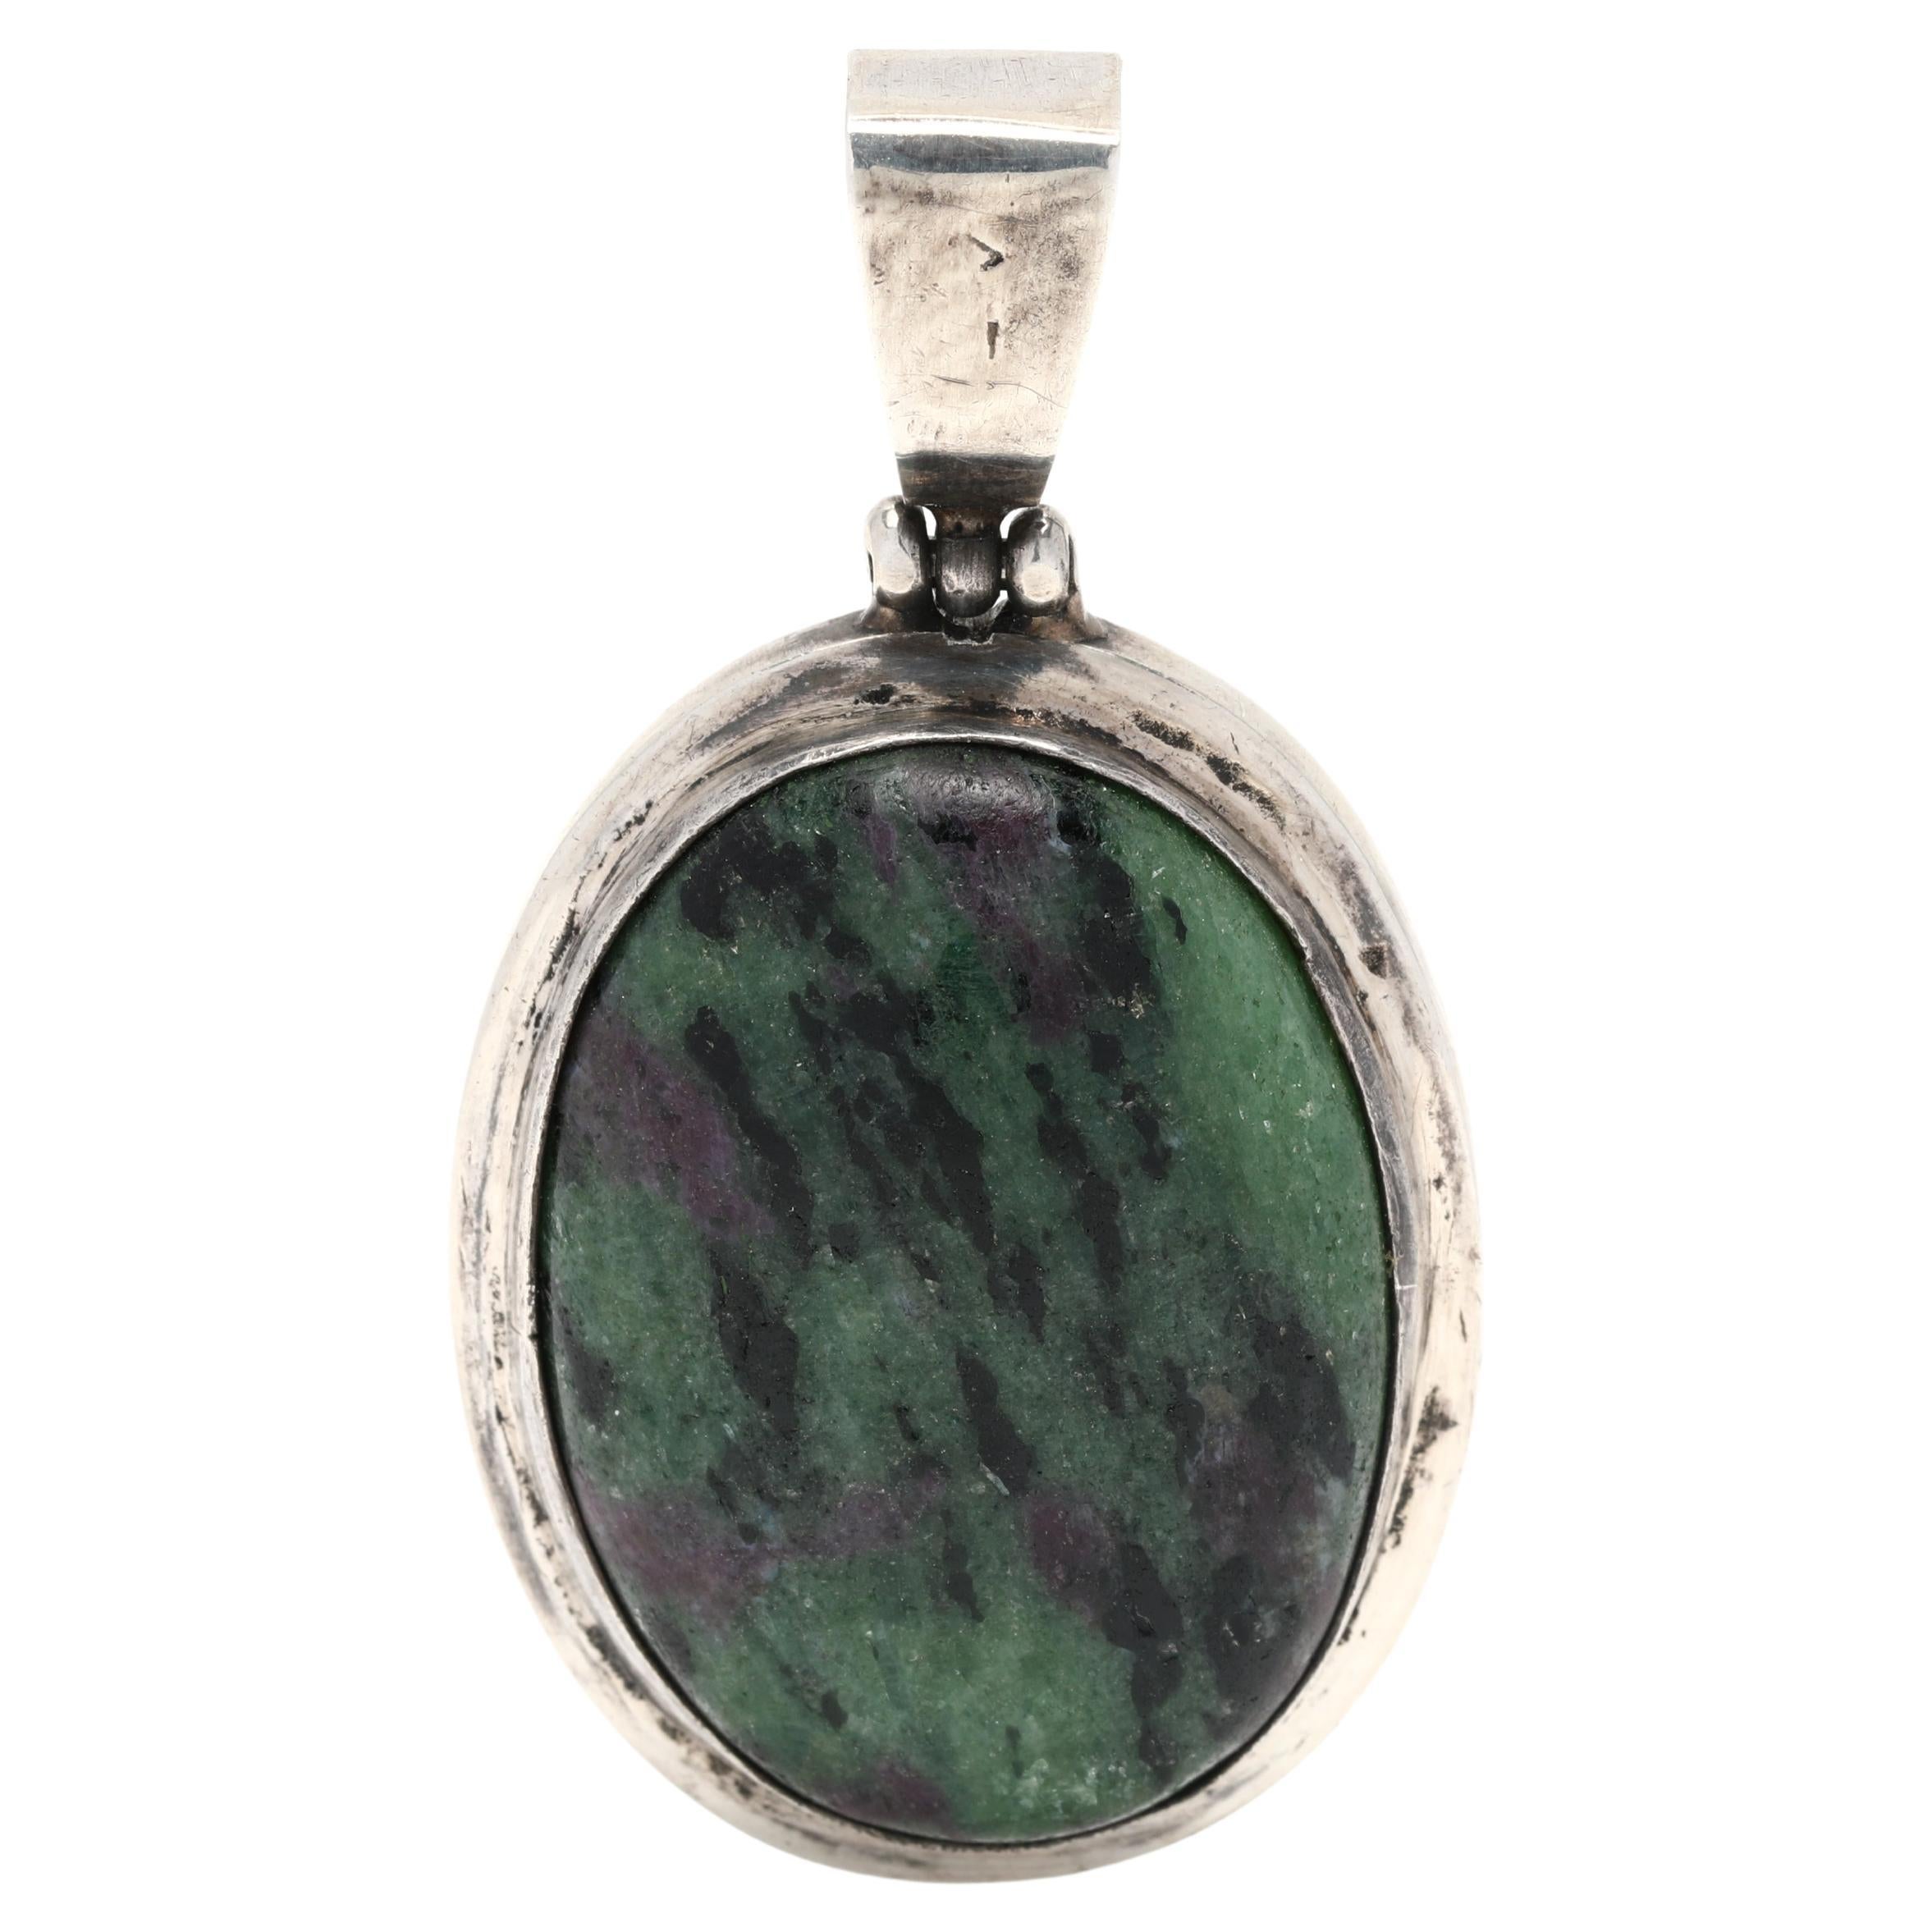 Vintage Large Ruby in Zoisite Pendant, Sterling Silver, Length 2 Inches, Oval For Sale